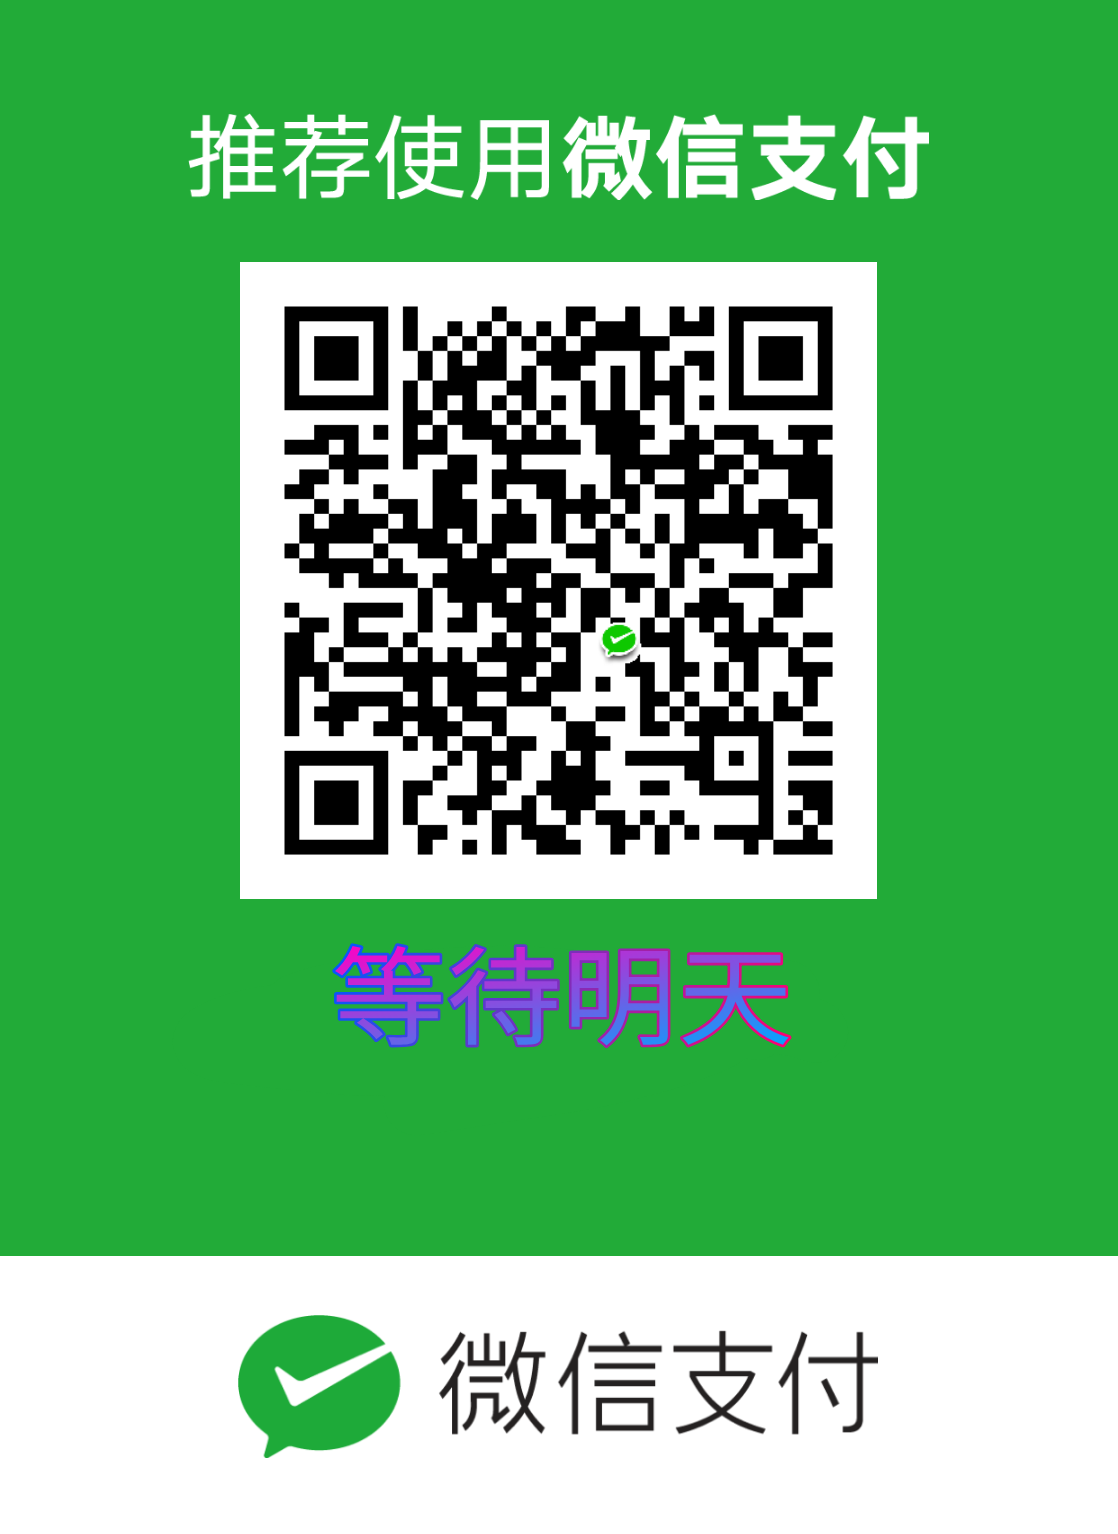 mm_facetoface_collect_qrcode_1568538512531.png